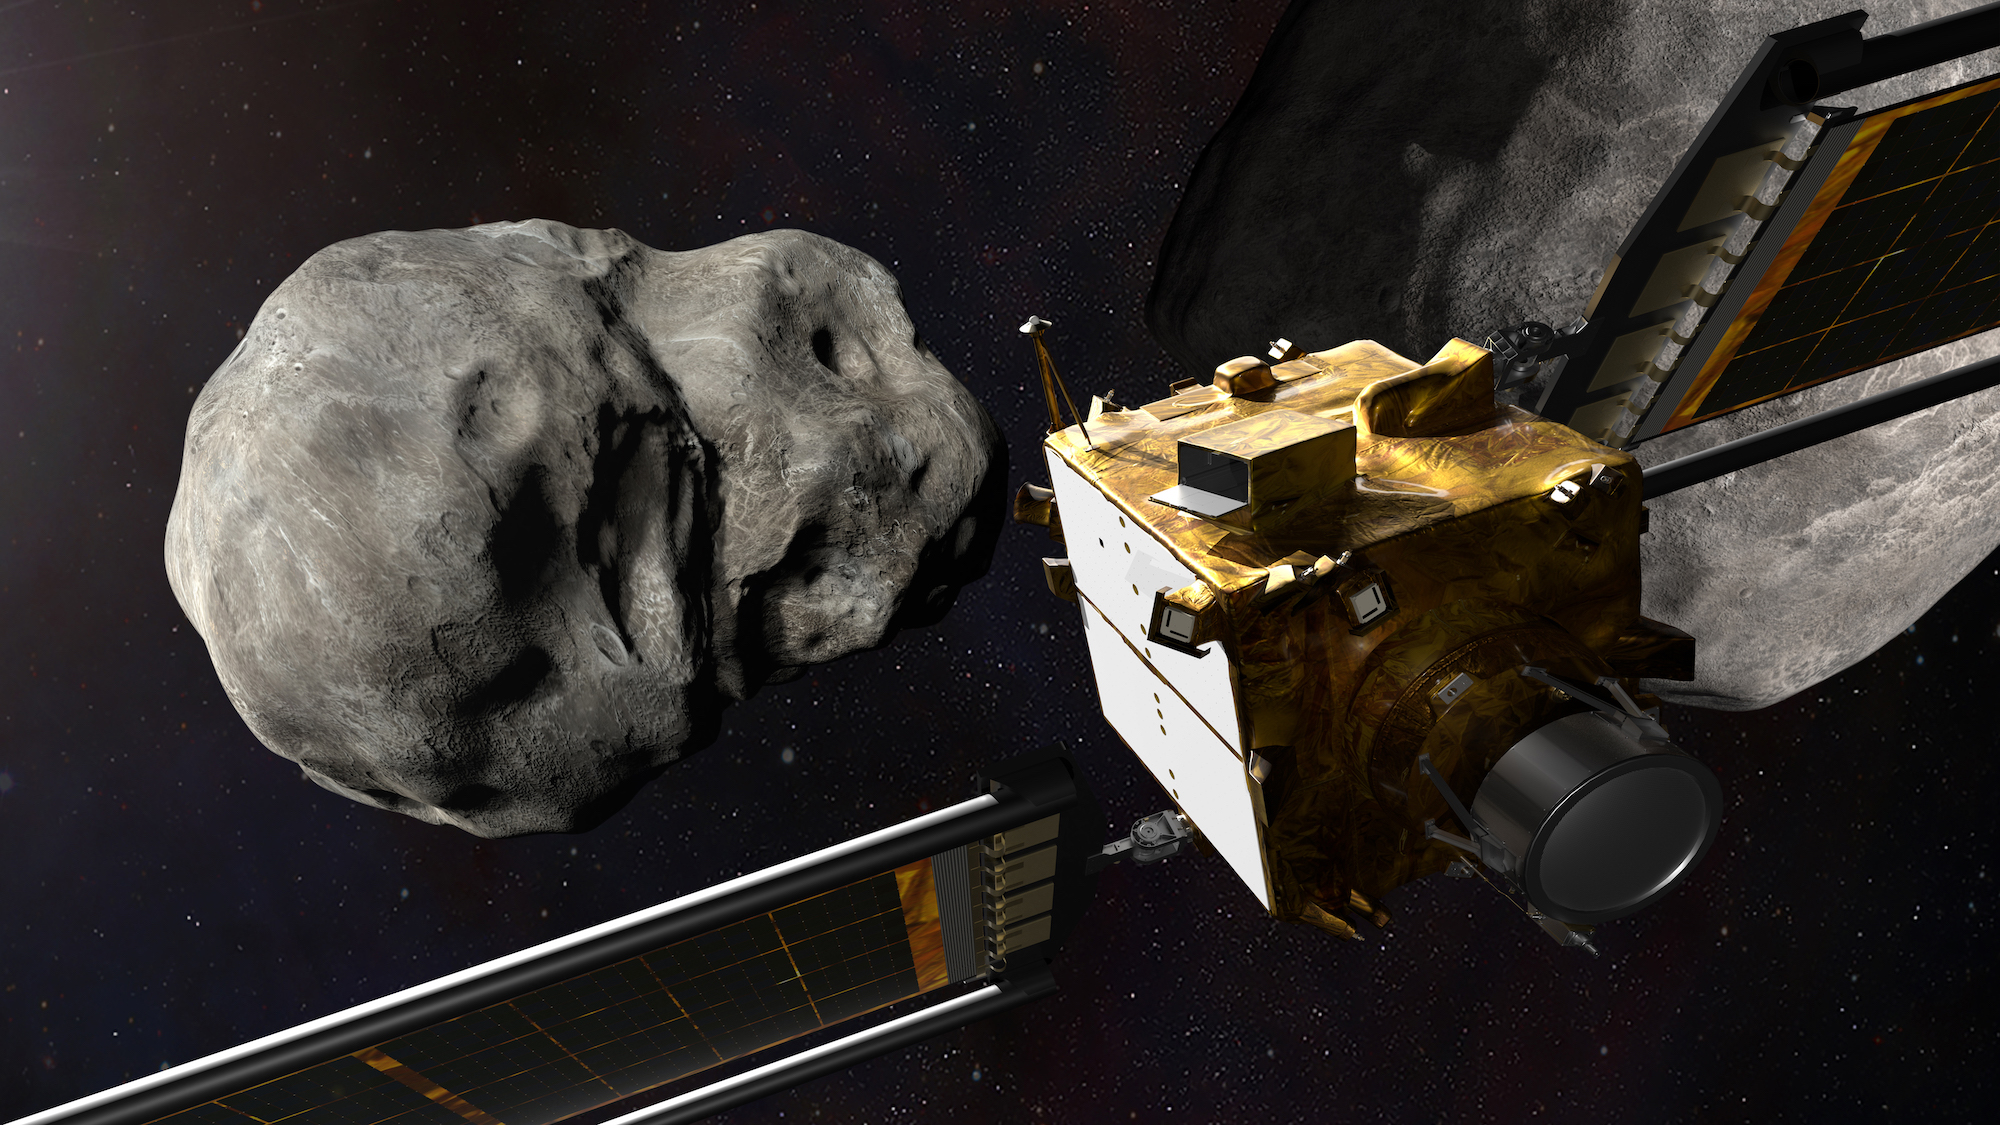 With just six months until NASA’s Double Asteroid Redirection Test (DART) spacecraft is scheduled to impact an asteroid in the world’s first full-scale planetary defense test, Johns Hopkins APL has been named No. 3 on Fast Company’s 2022 World’s Most Innovative Space Companies list for building and managing DART.